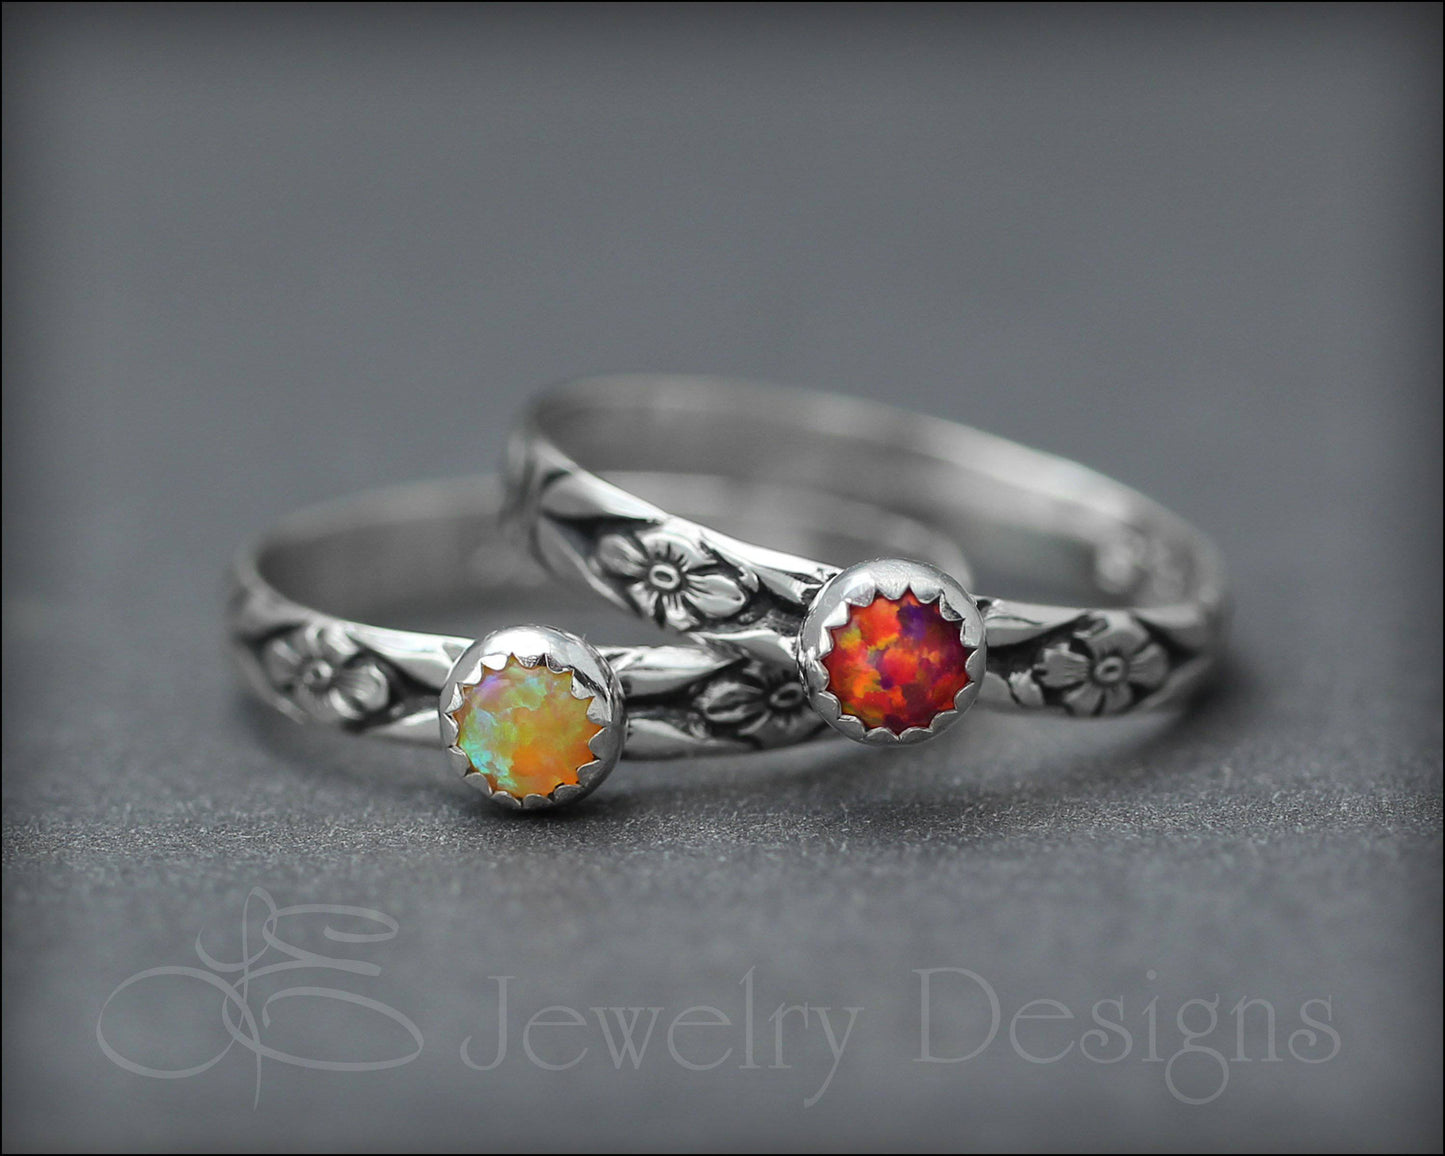 Floral Birthstone or Opal Stacking Ring - LE Jewelry Designs